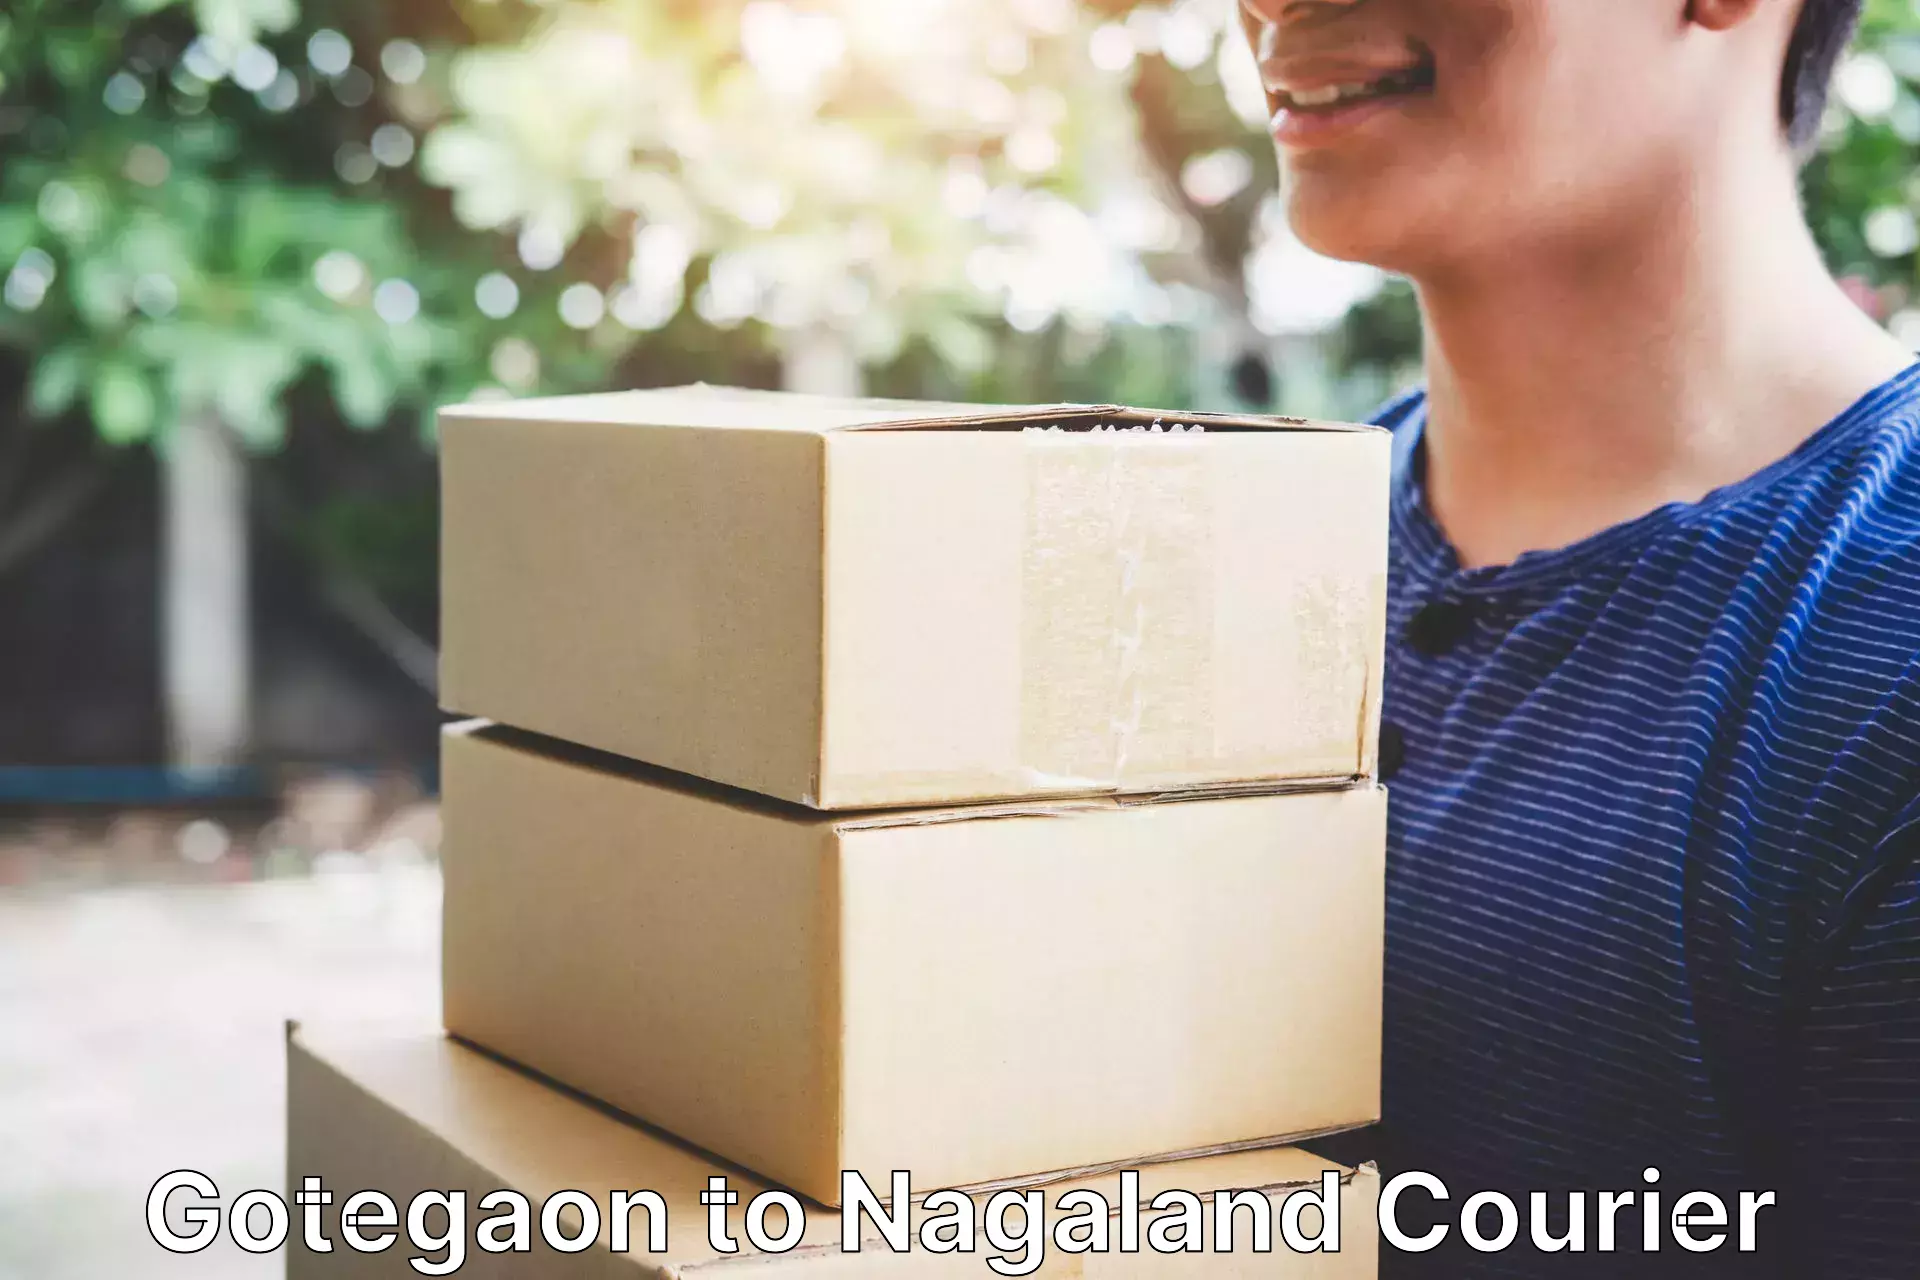 Global freight services Gotegaon to Nagaland